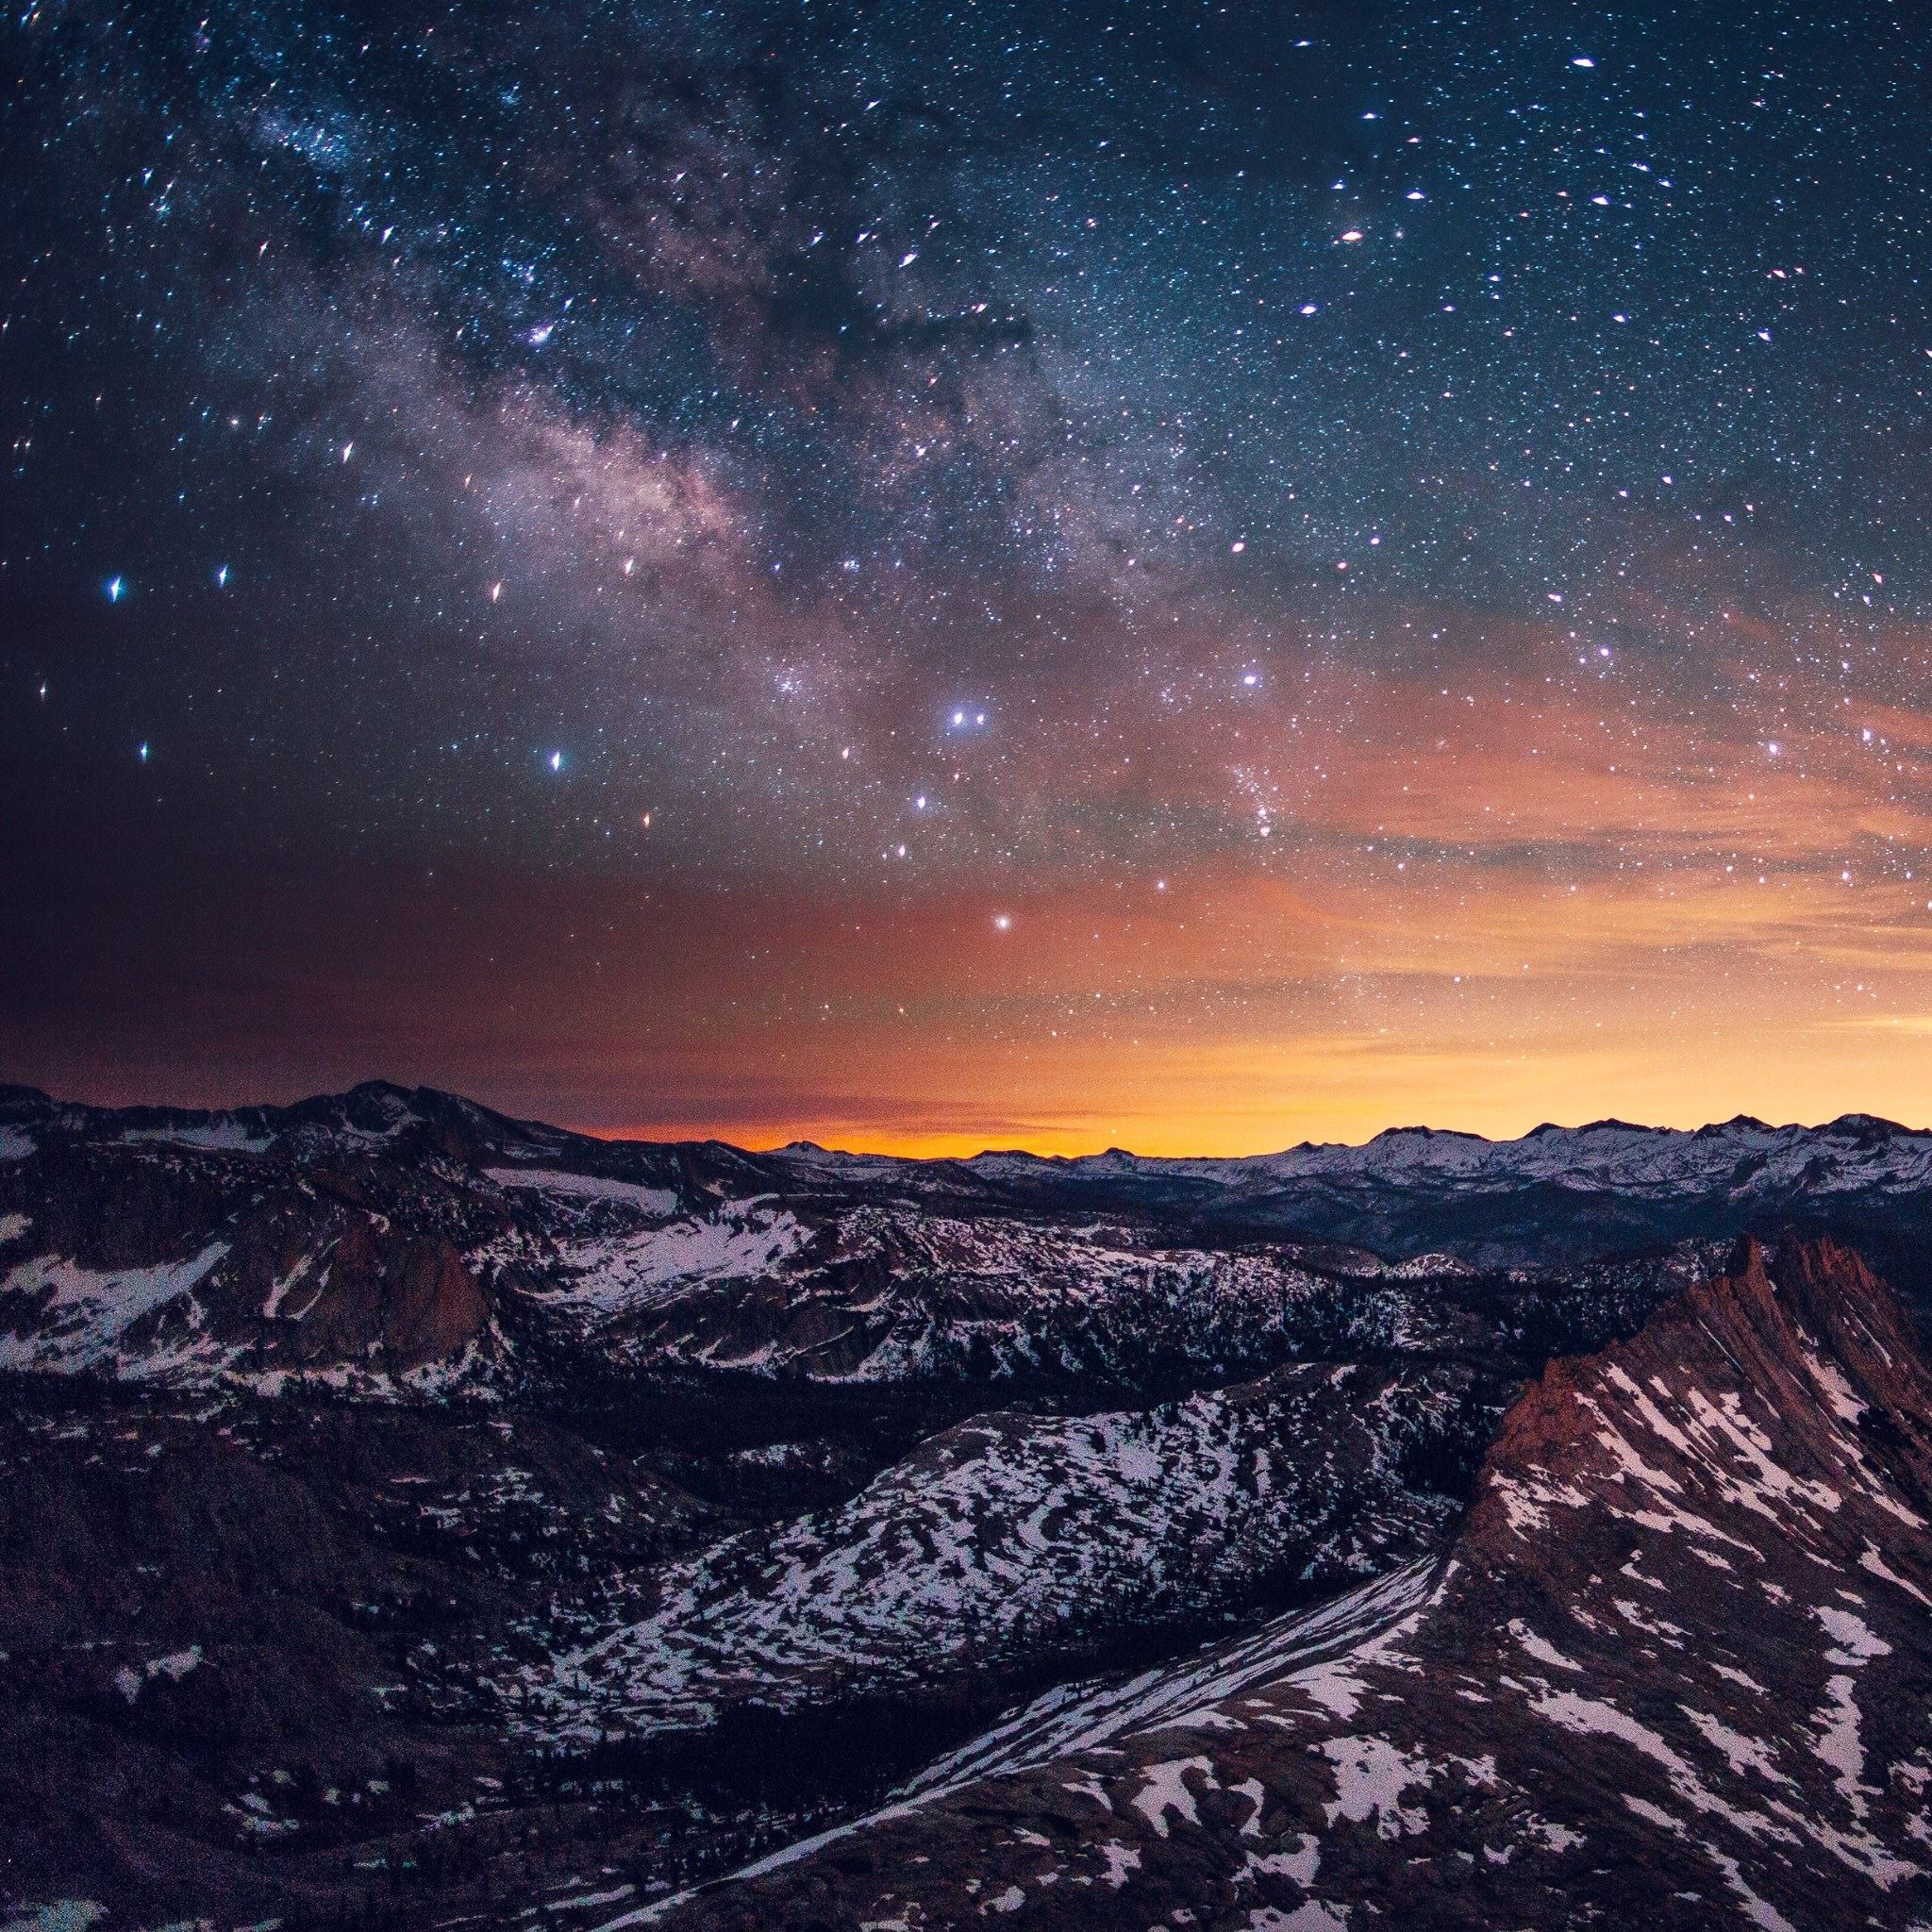 Shiny Sky View Over Snowy Mountains iPad Air wallpaper 